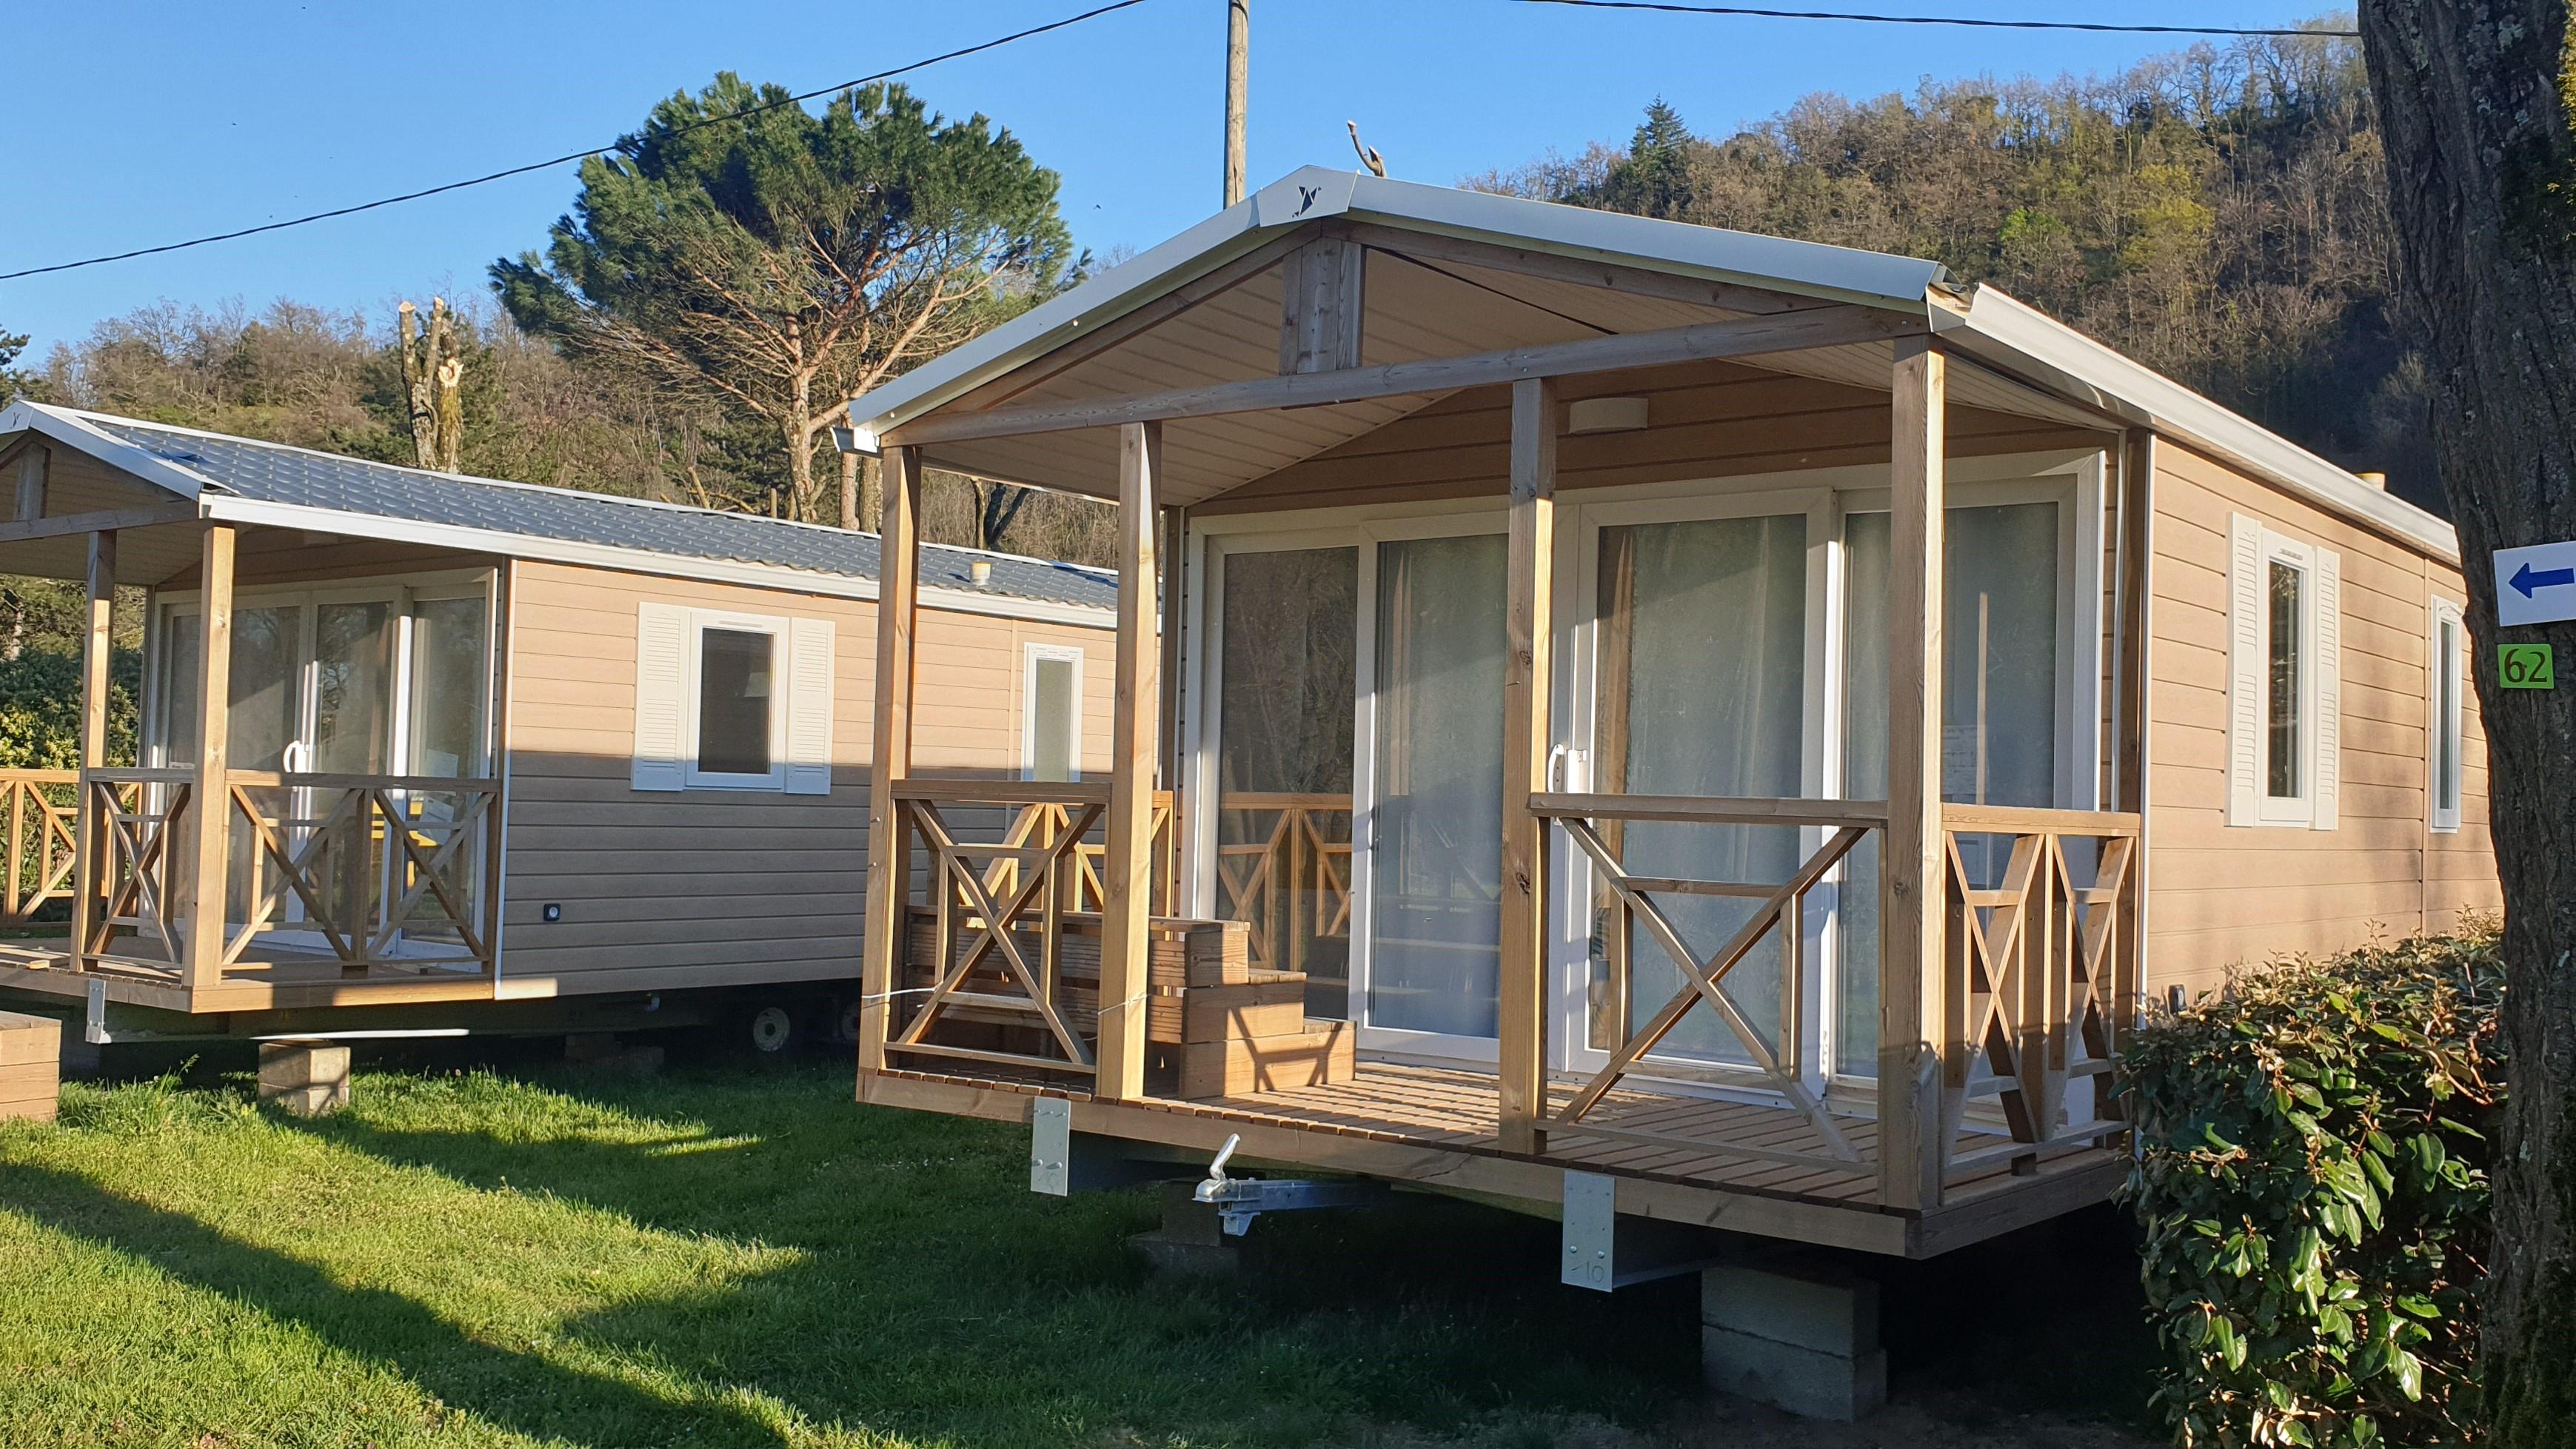 Accommodation - Mobil Home Premium Evo 33 Tp Climatisé 2 Chambres - CAMPING LES FOULONS